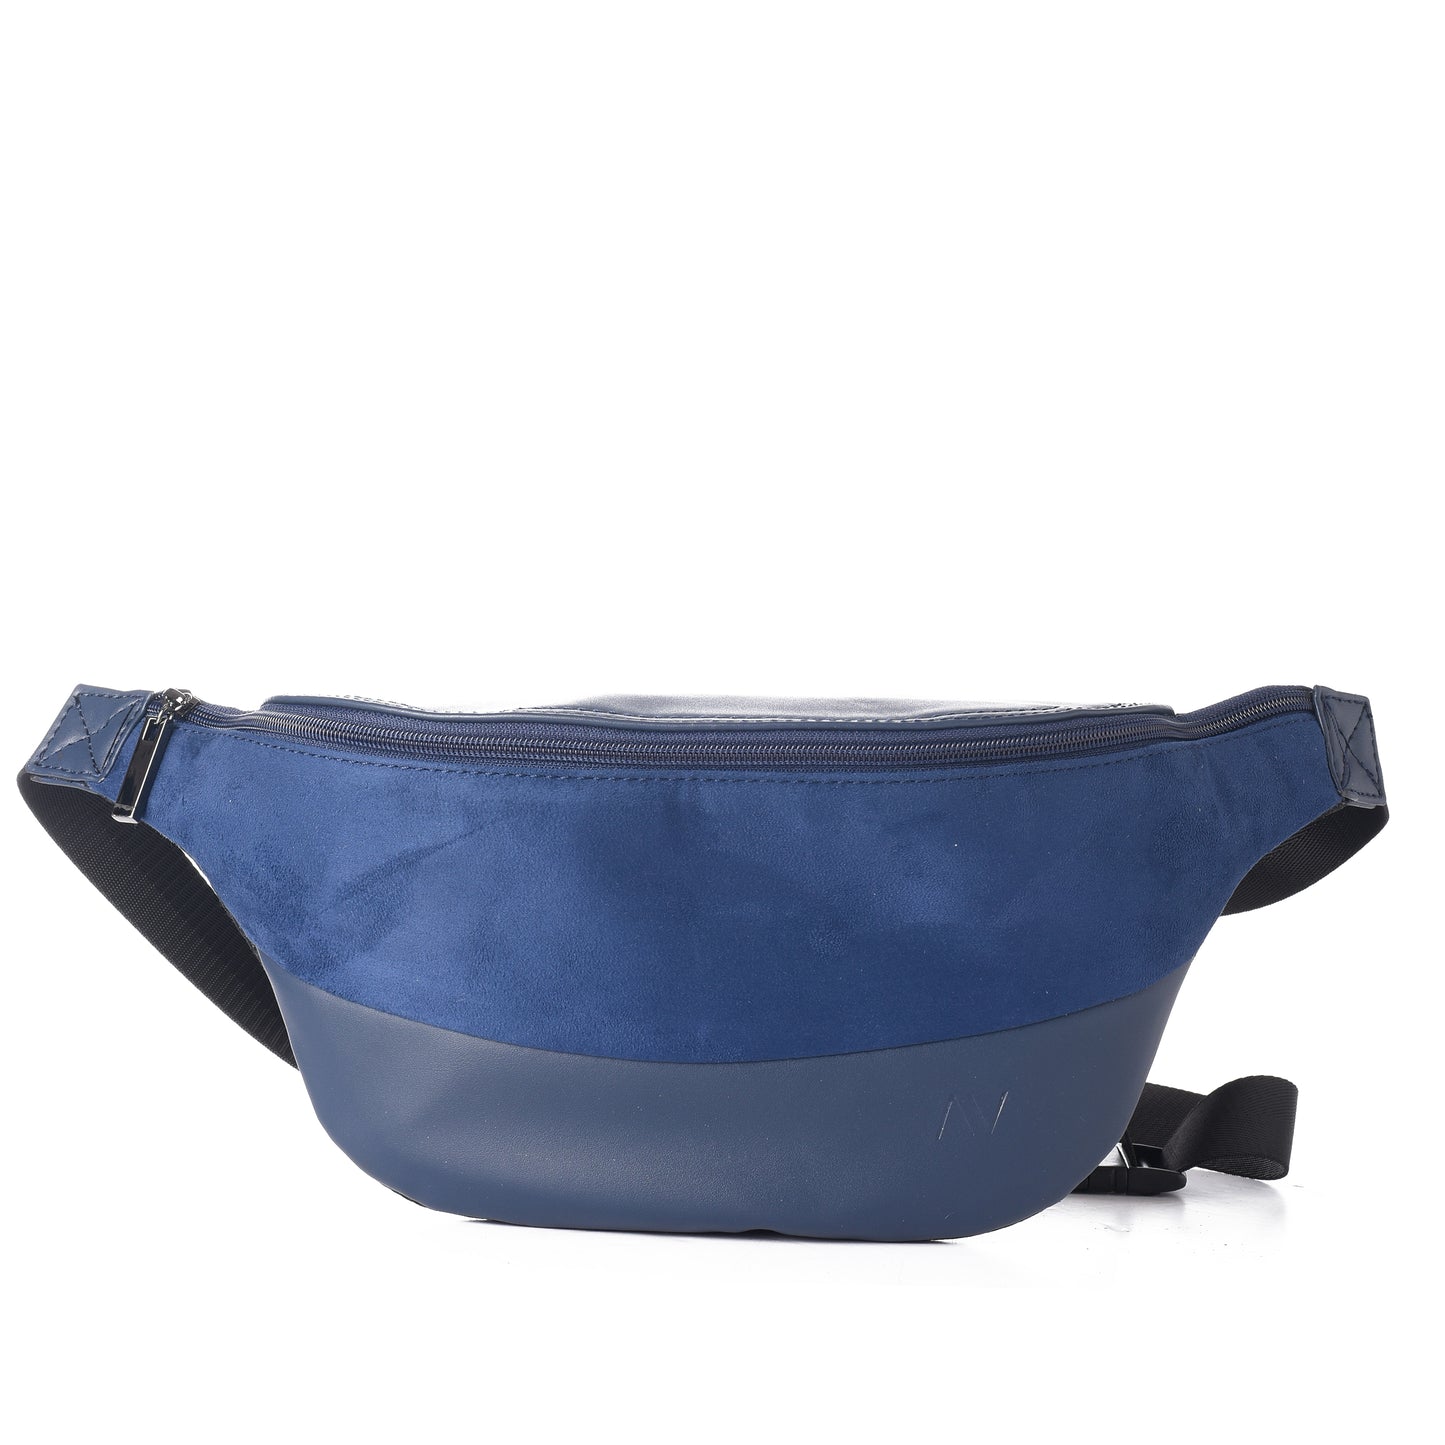 Fanny pack - Navy with navy Suede